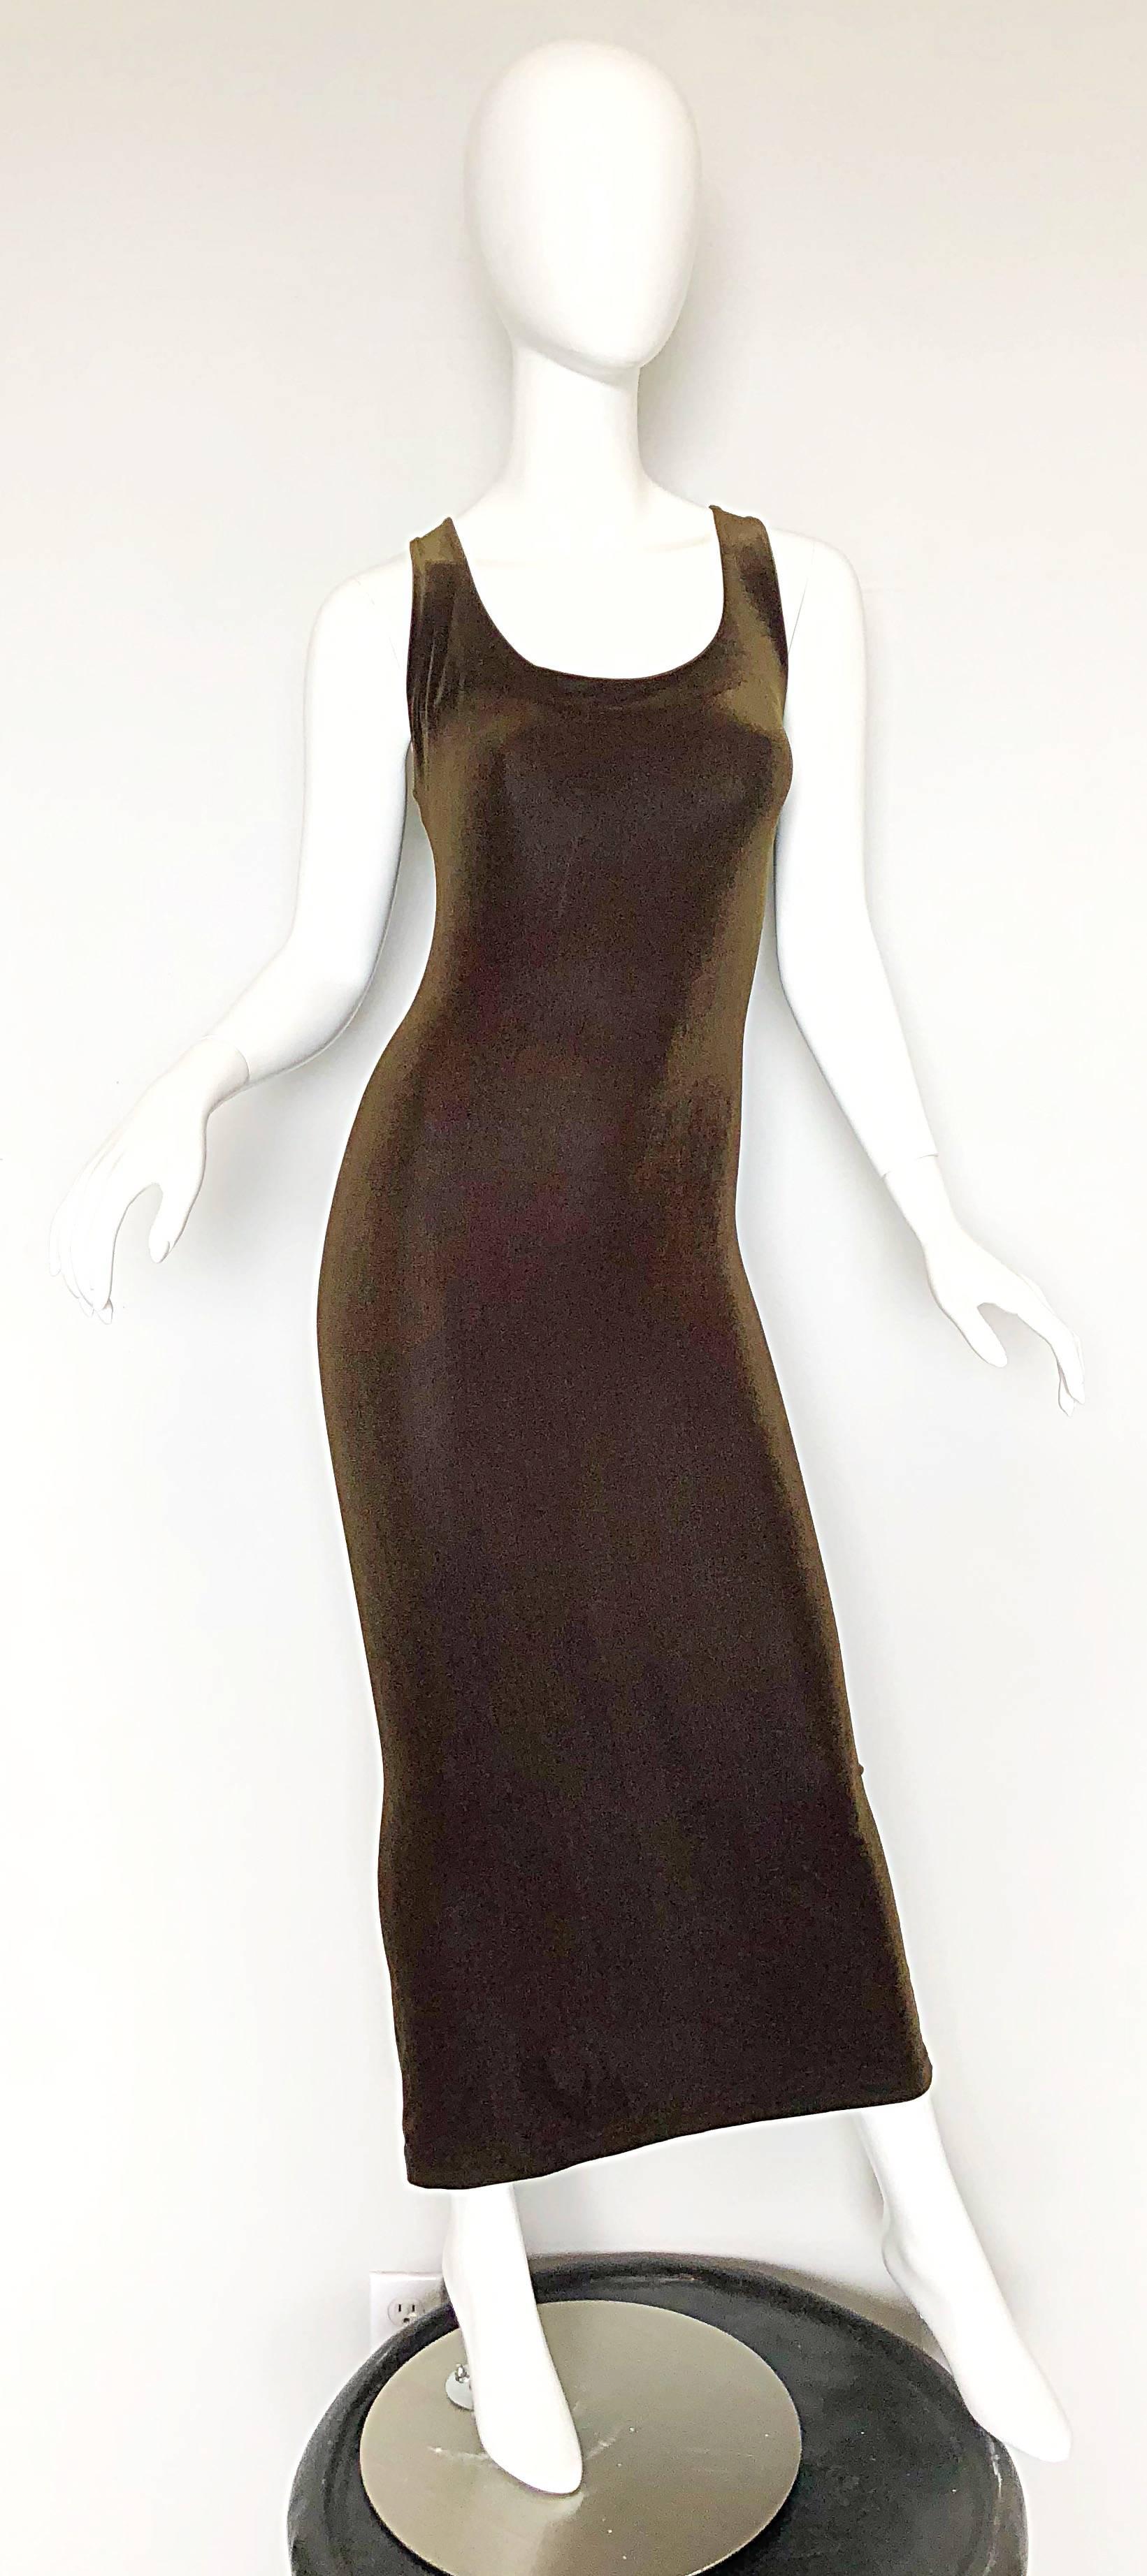 Brilliant 90s BETSEY JOHNSON bodcon chocolate brown maxi dress! Features the softest luxurious brown velour fabric that stretches to fit. Simply slips over the head. Very flattering silhouette that is perfect from day to evening. Great belted or